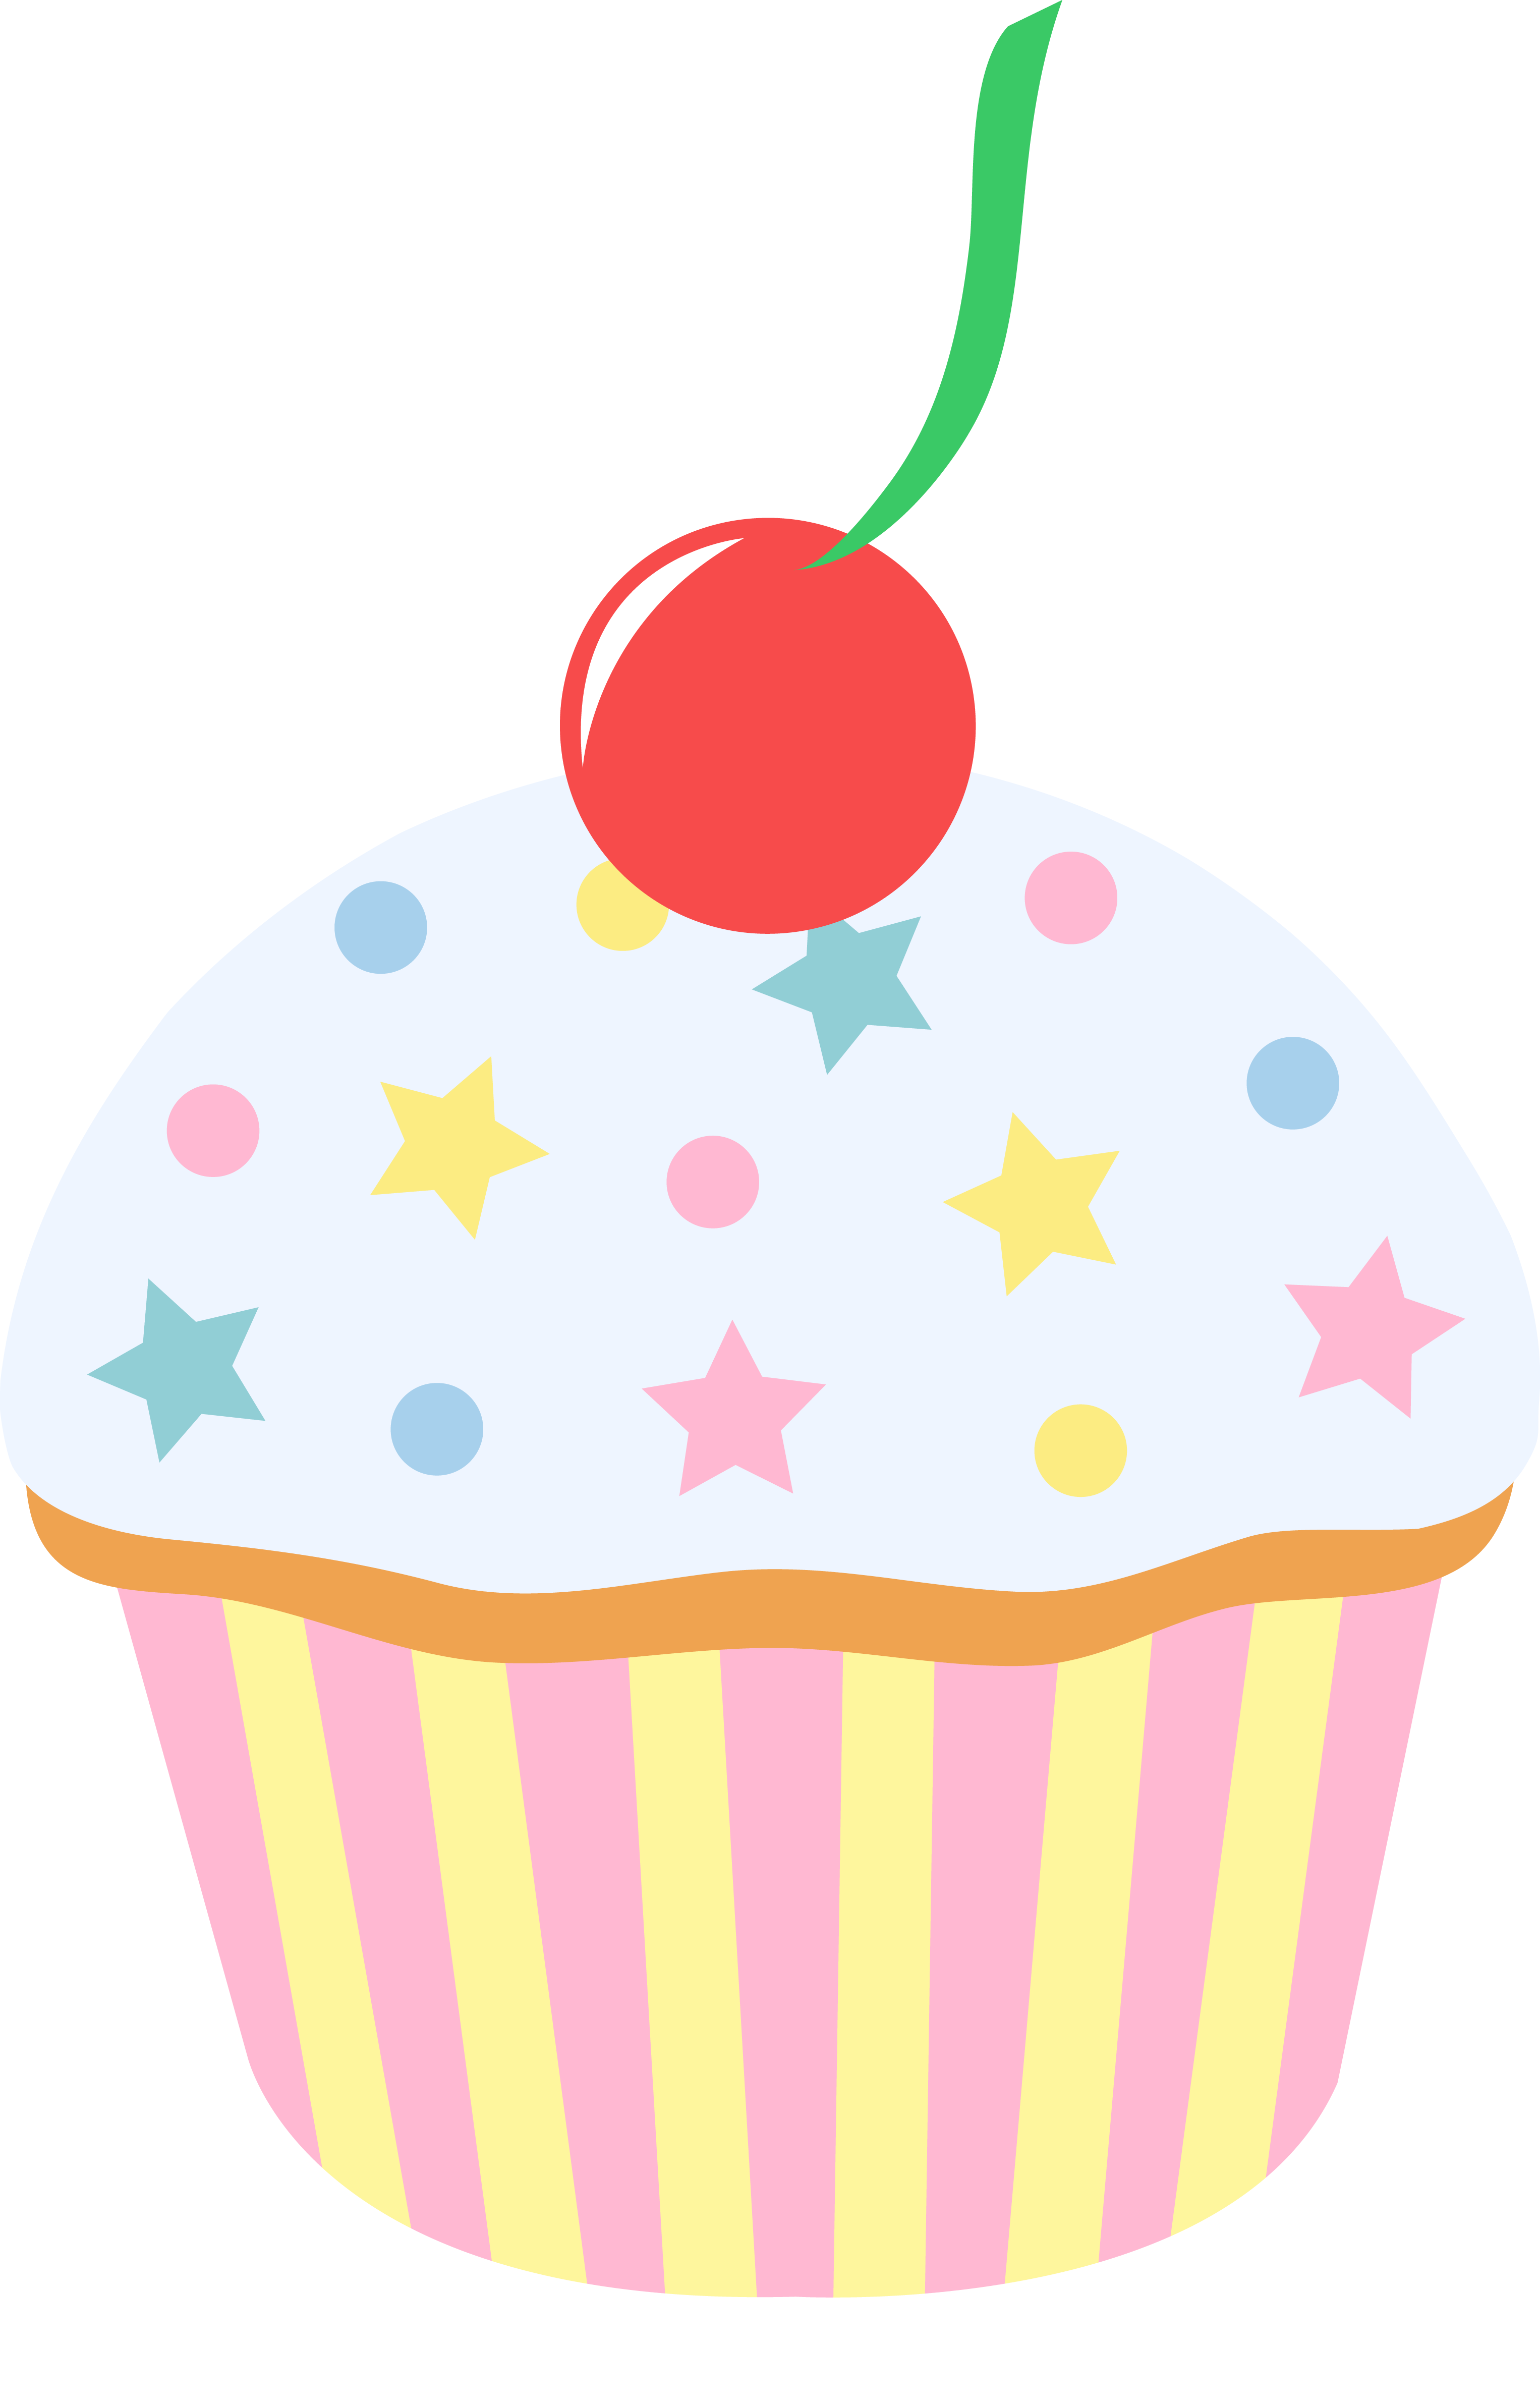 Cupcake free cup cake clip art clipart cliparts for you